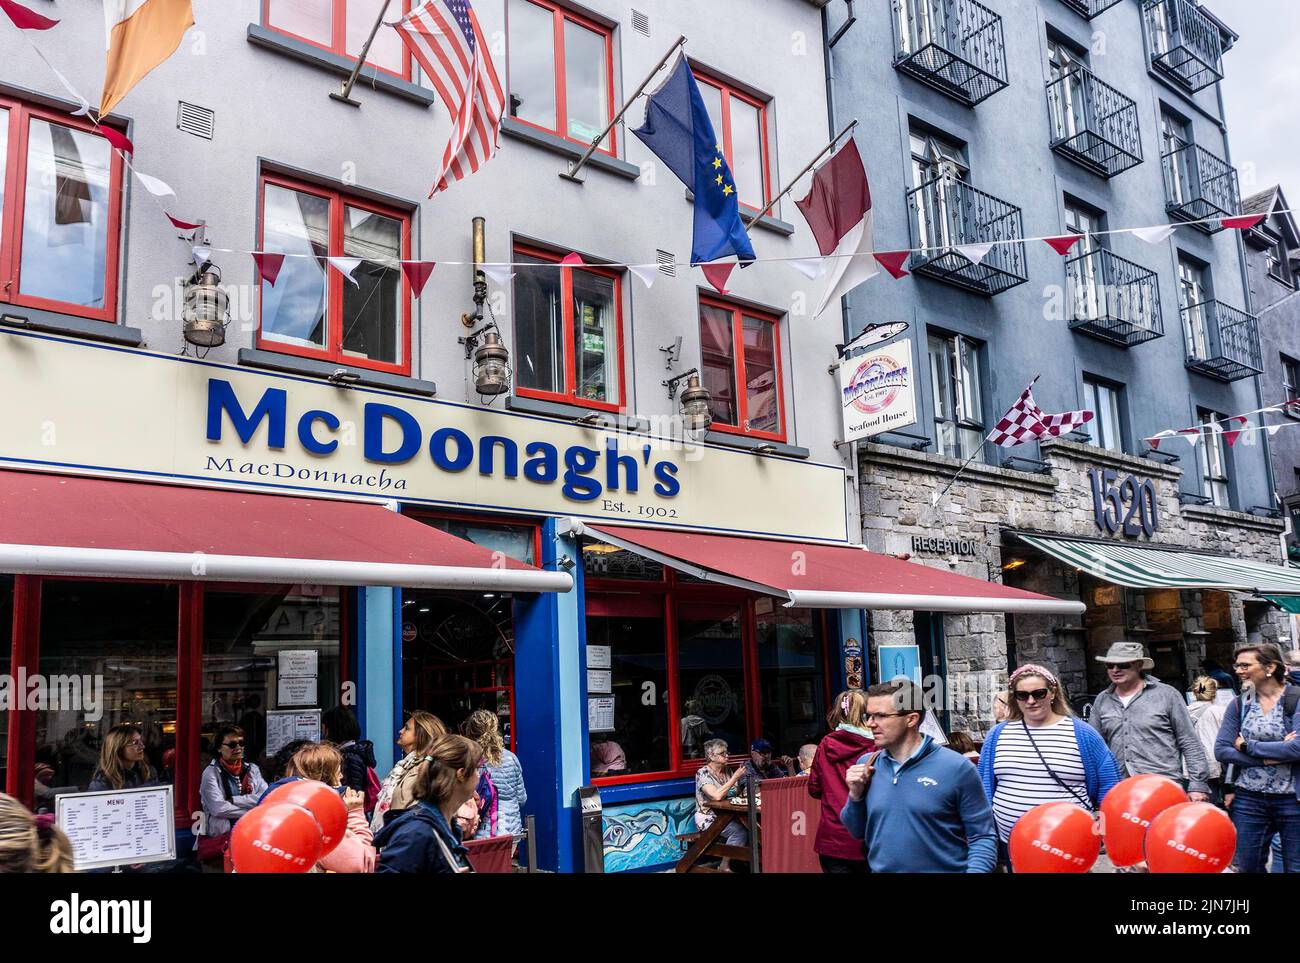 McDonaghs Fish and Chip Bar in der Quay Street Galway. Stockfoto